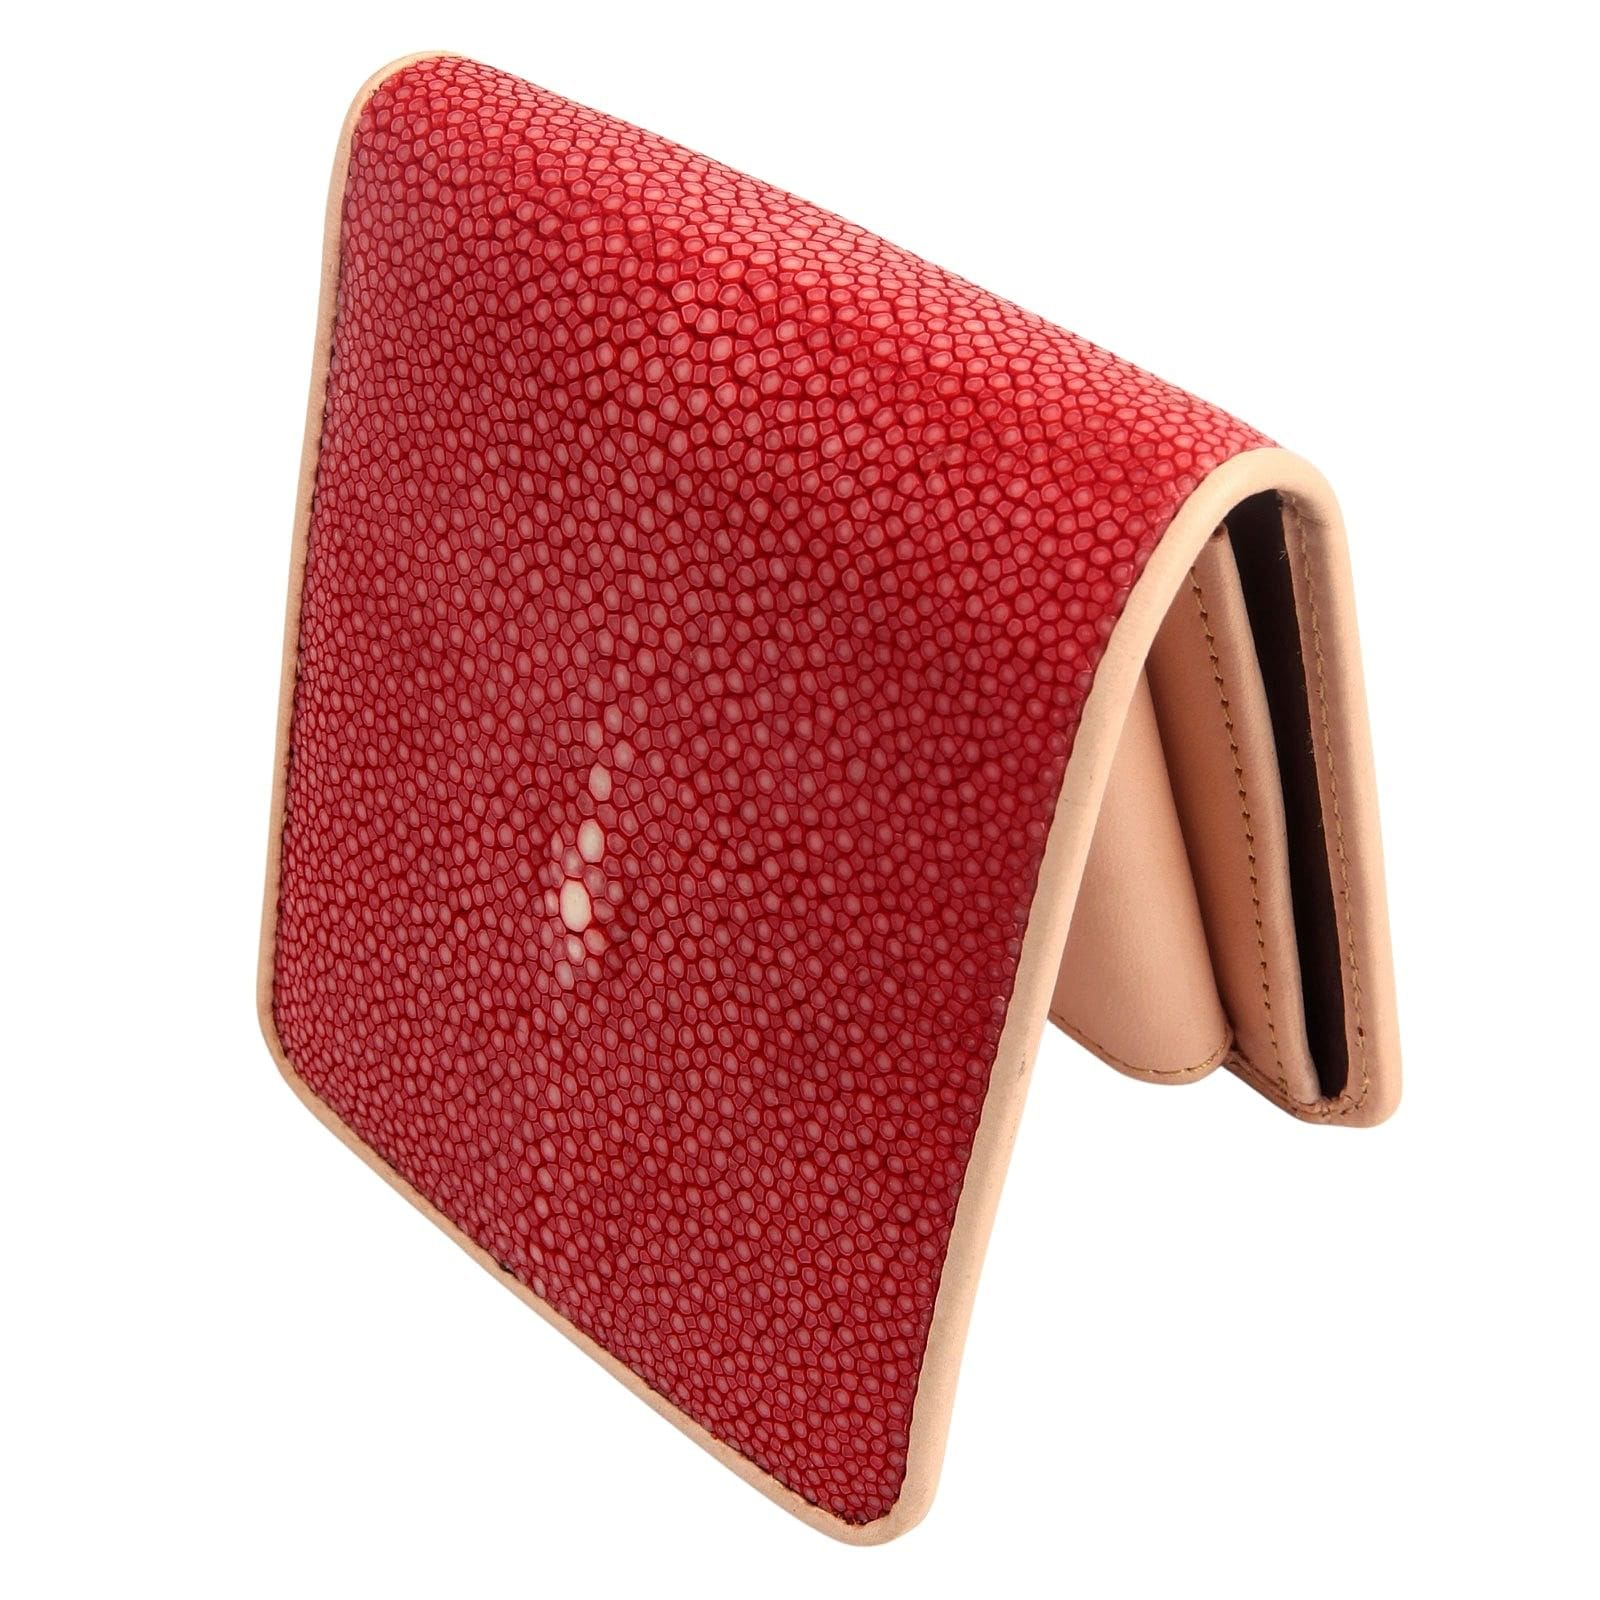 Metallic Weave on Leather Wallet with Multiple Pockets - Scintillating Red